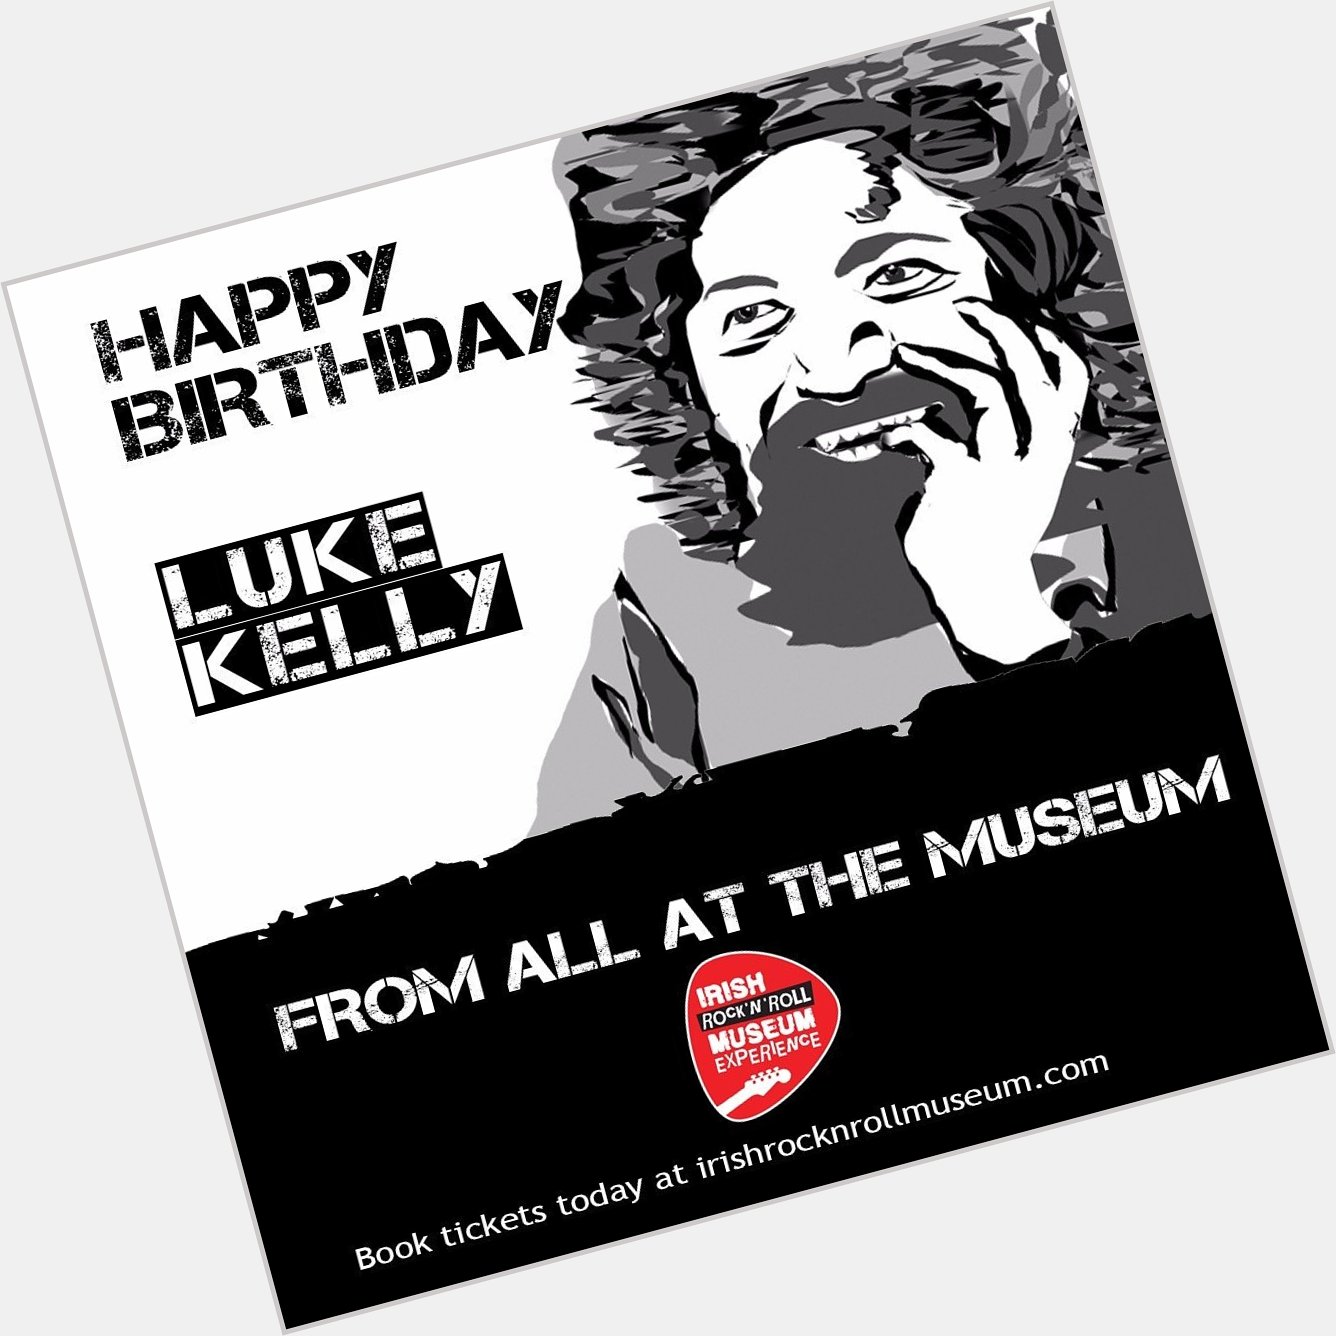 Luke Kelly was born in 1949. Would have been 77 today. Happy Birthday from all at the museum! 